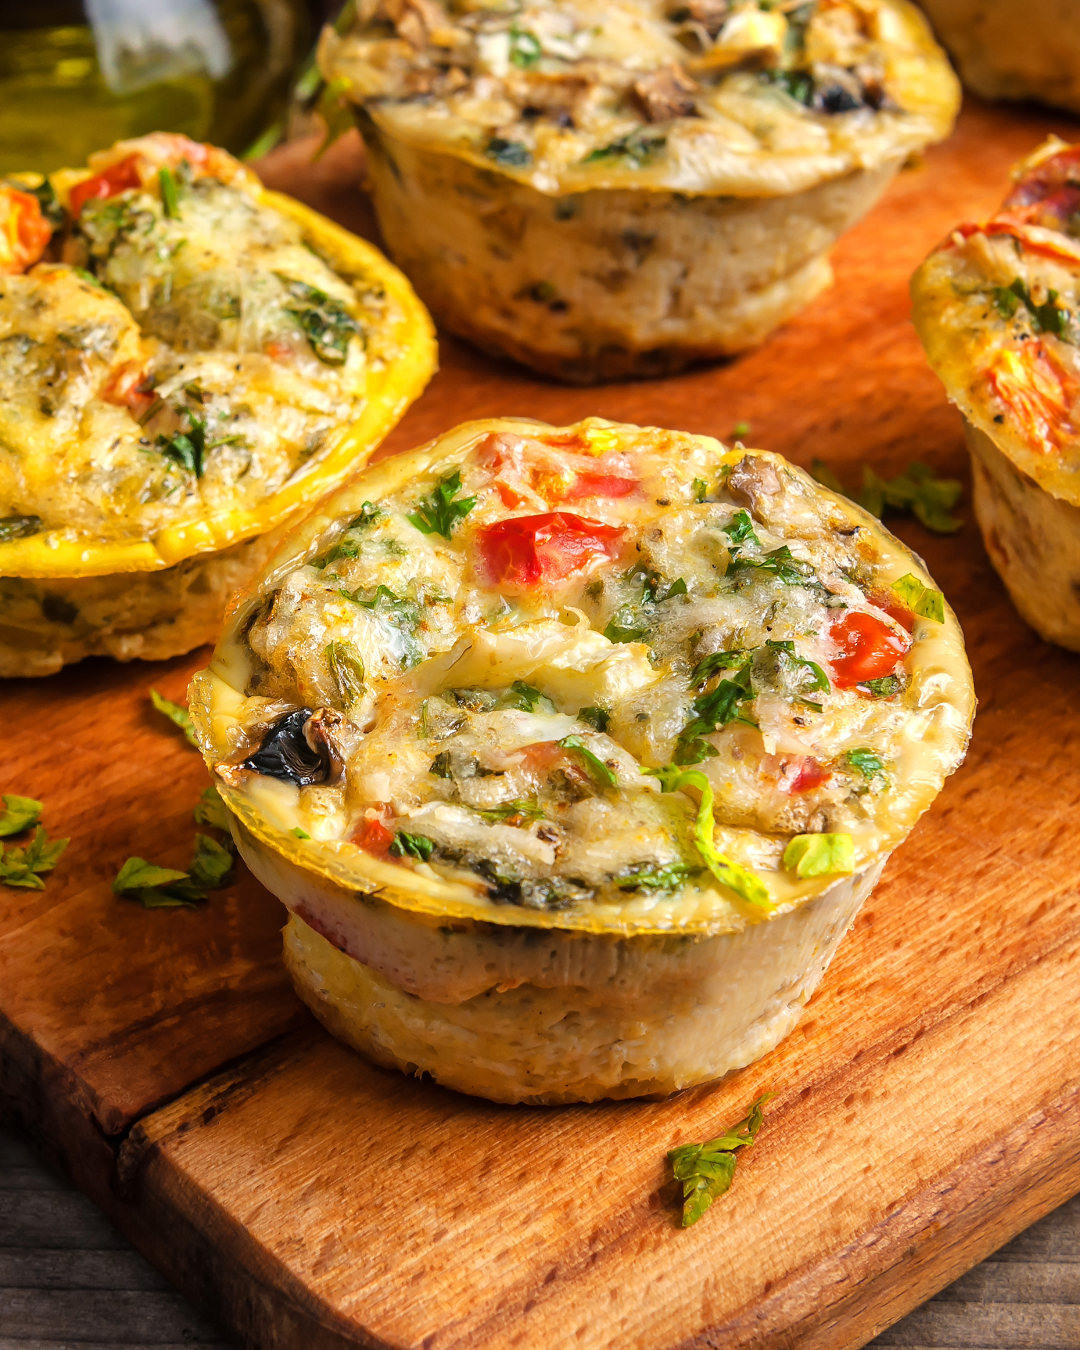 Egg muffins with vegetables and herbs on a wooden board